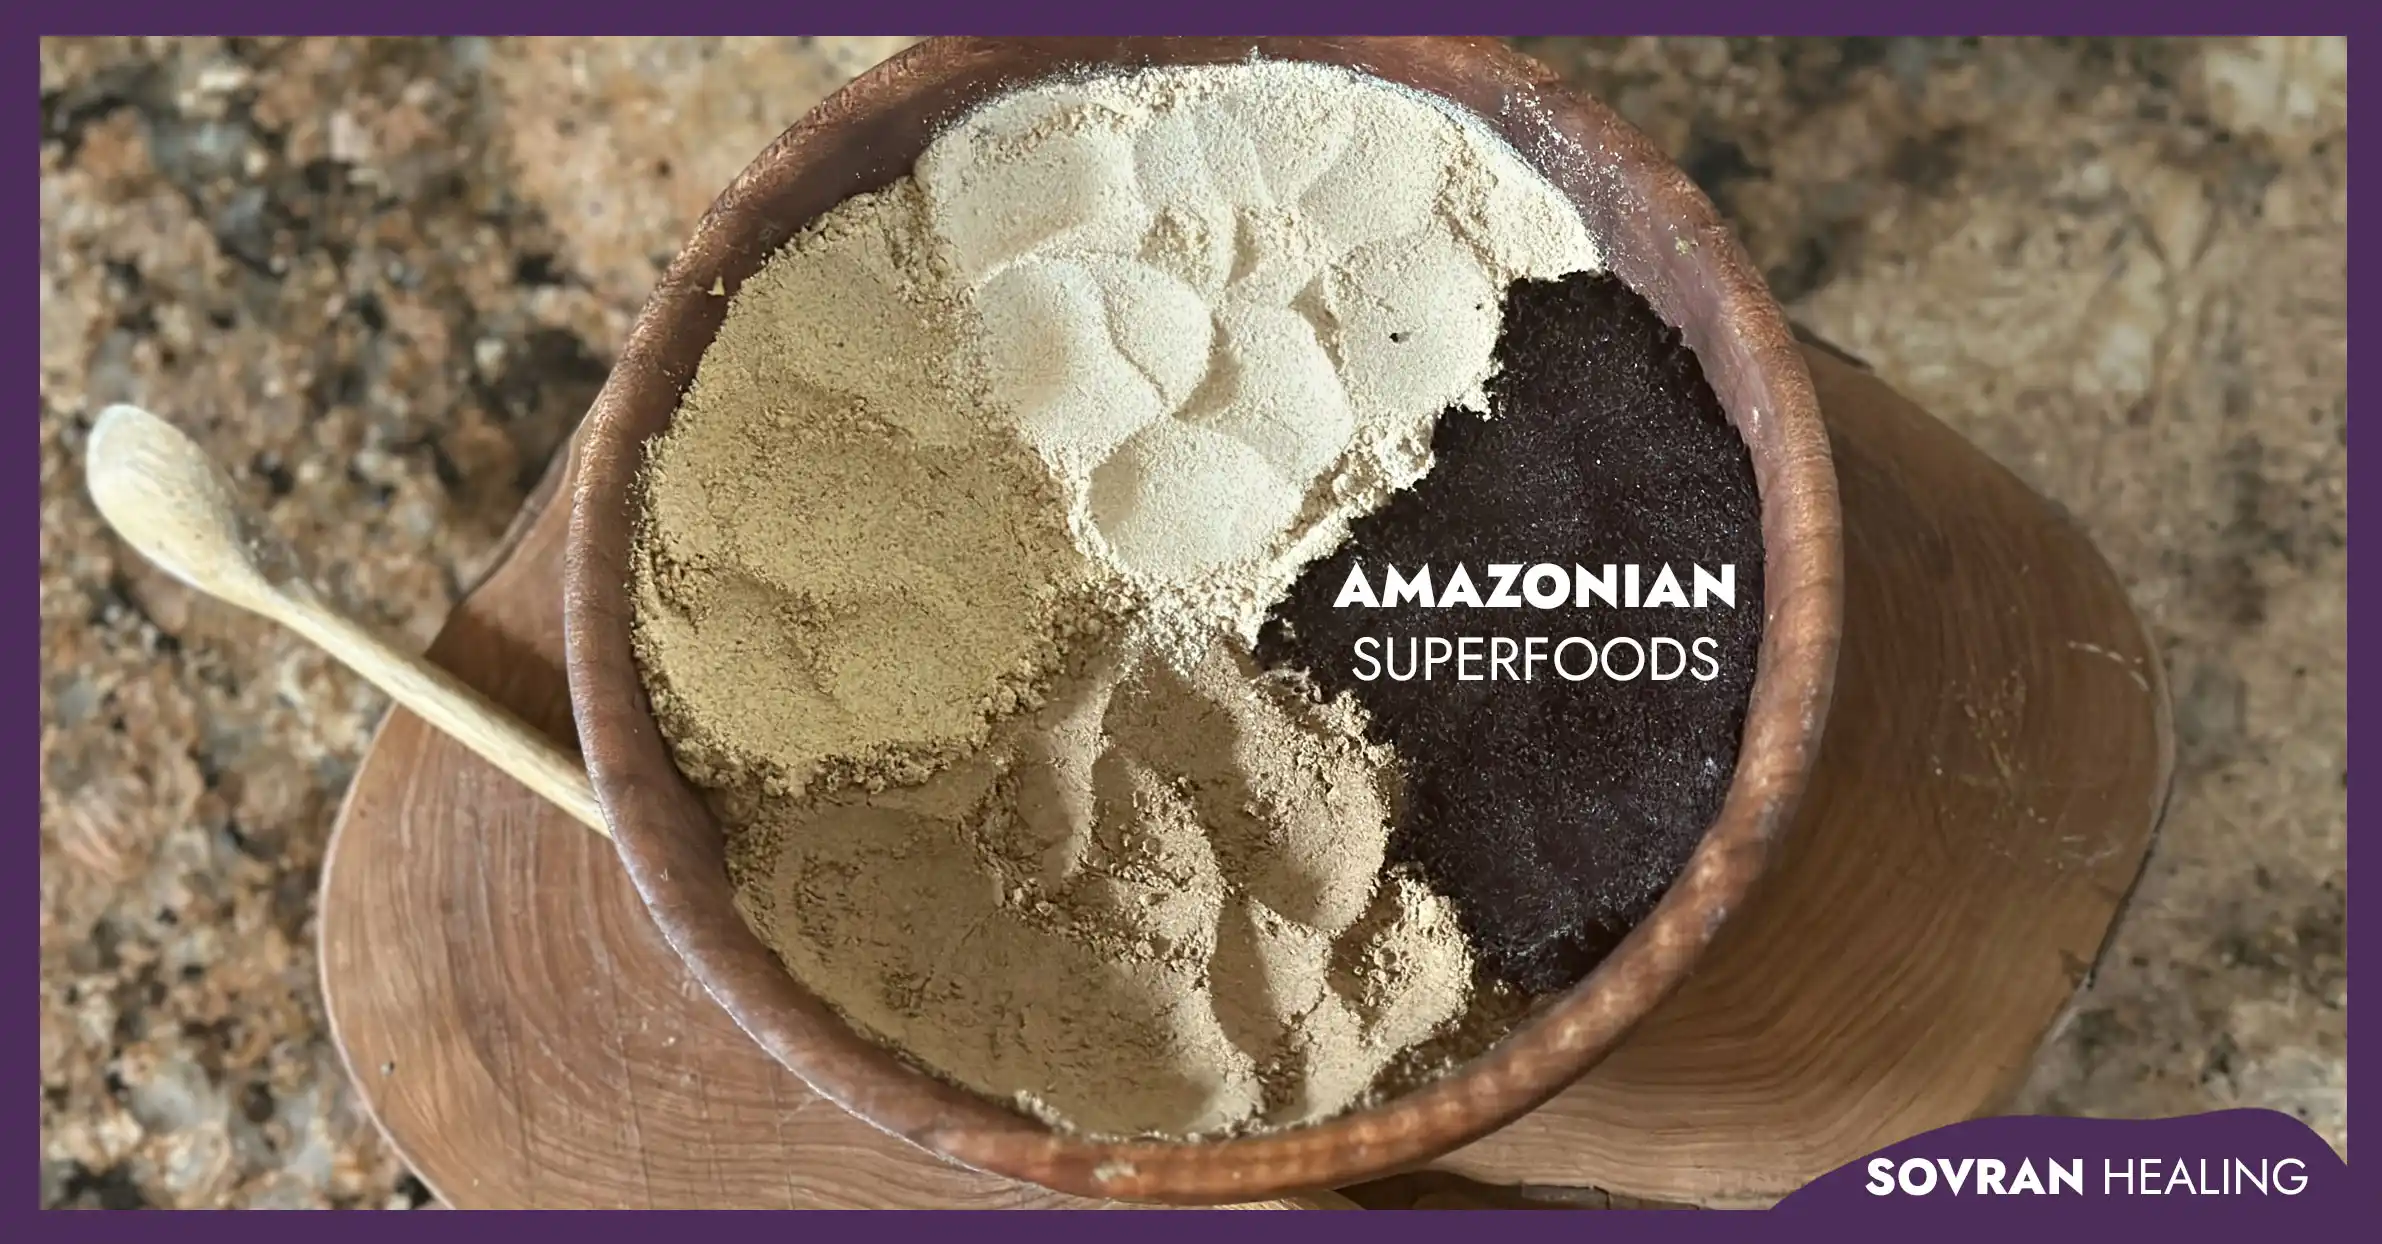 Image showing 4 different amazonian superfoods to create a blend